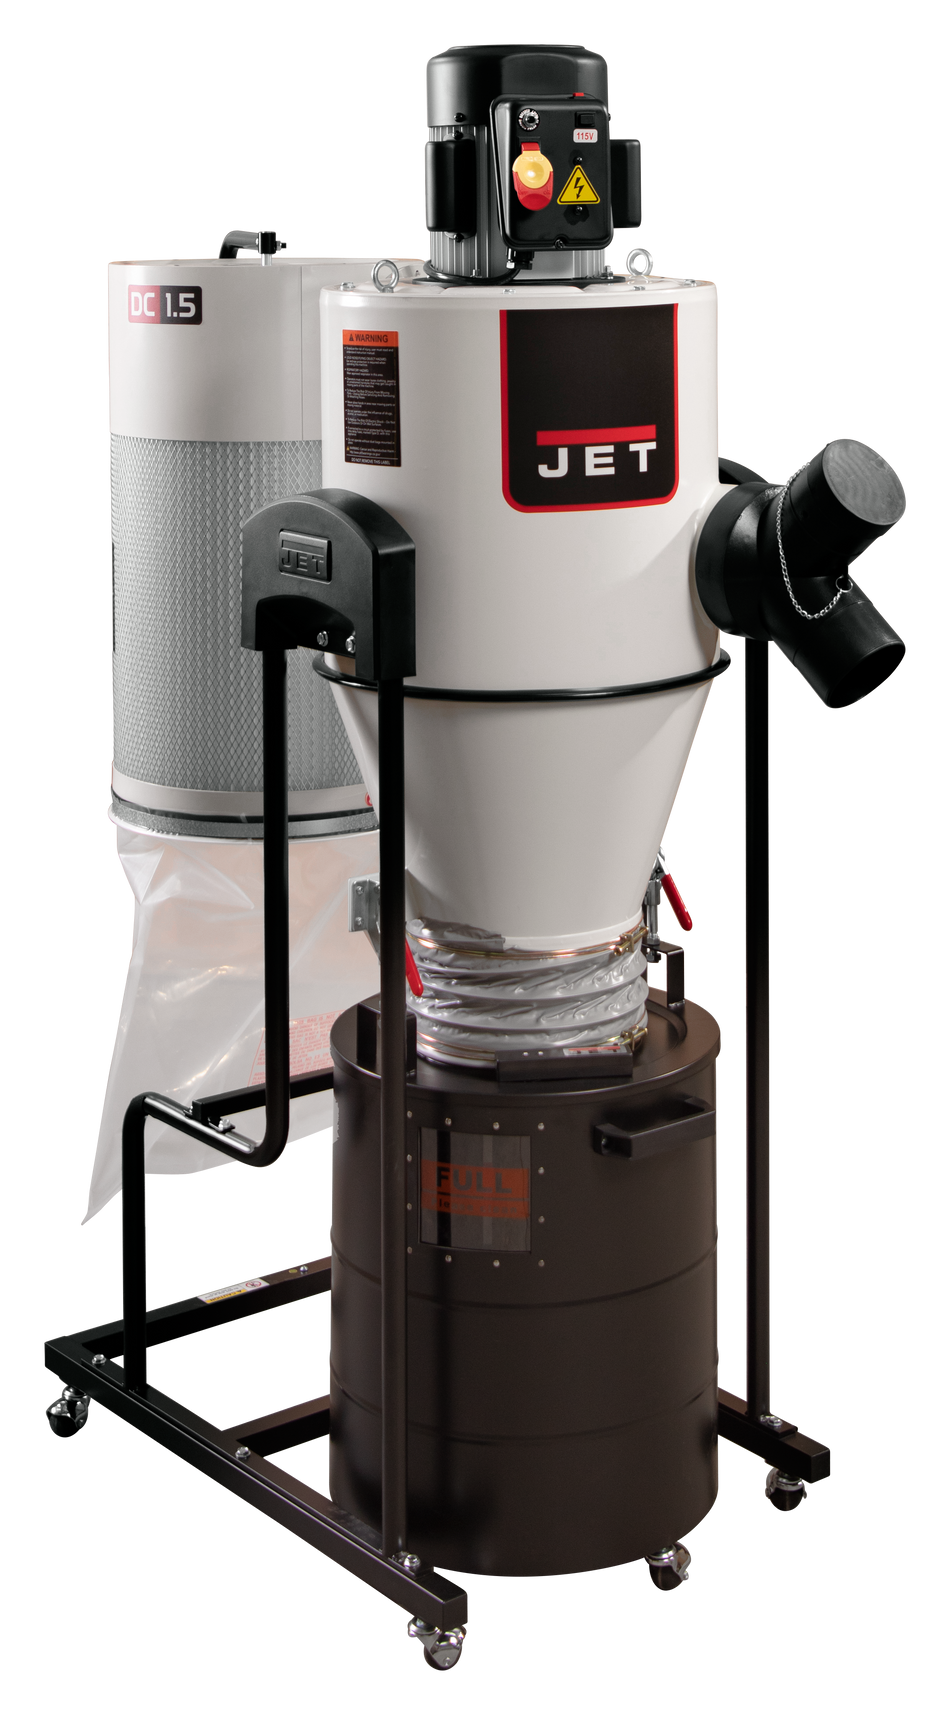 JET JCDC-1.5 Cyclone Dust Collector, 1.5HP, 115V